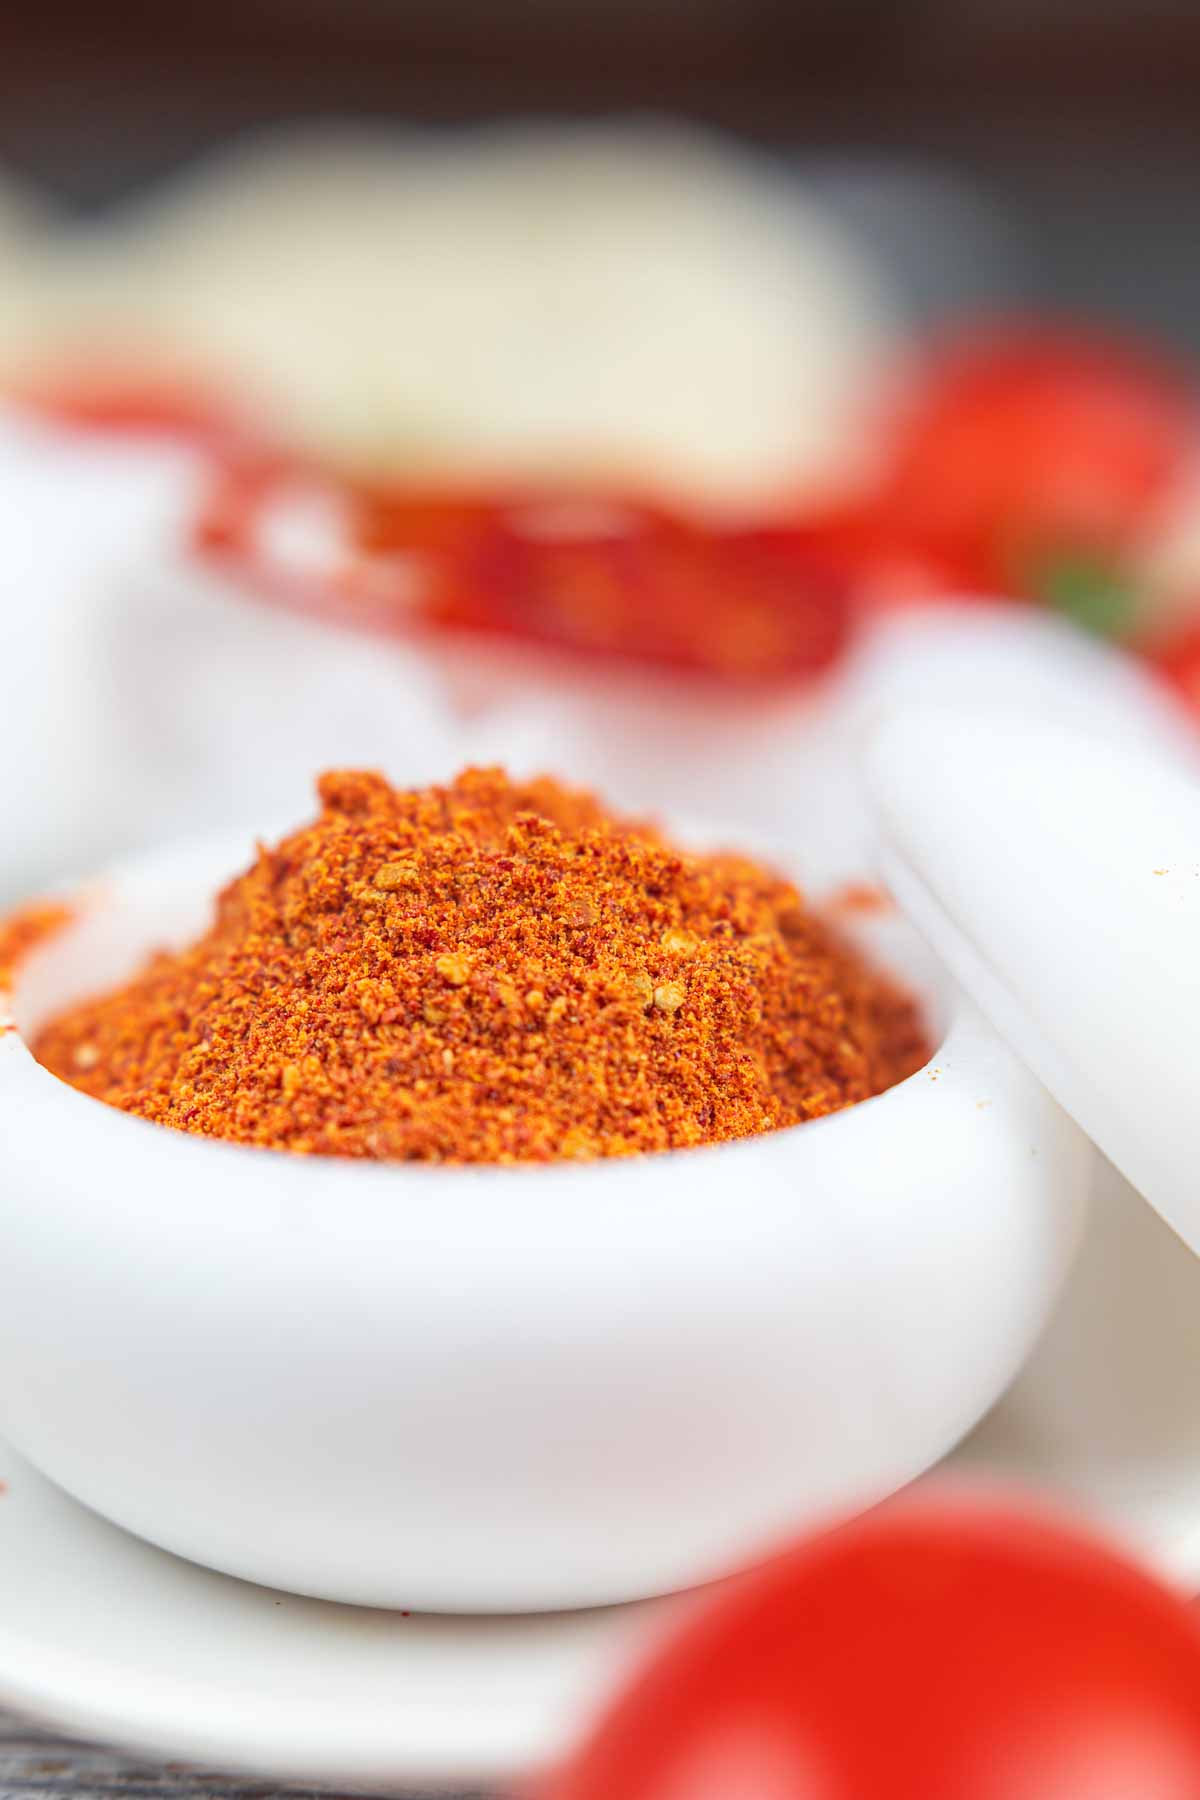 Ground tomato powder in a white ceramic bowl, closely focused, with blurred sliced red tomatoes in the background.